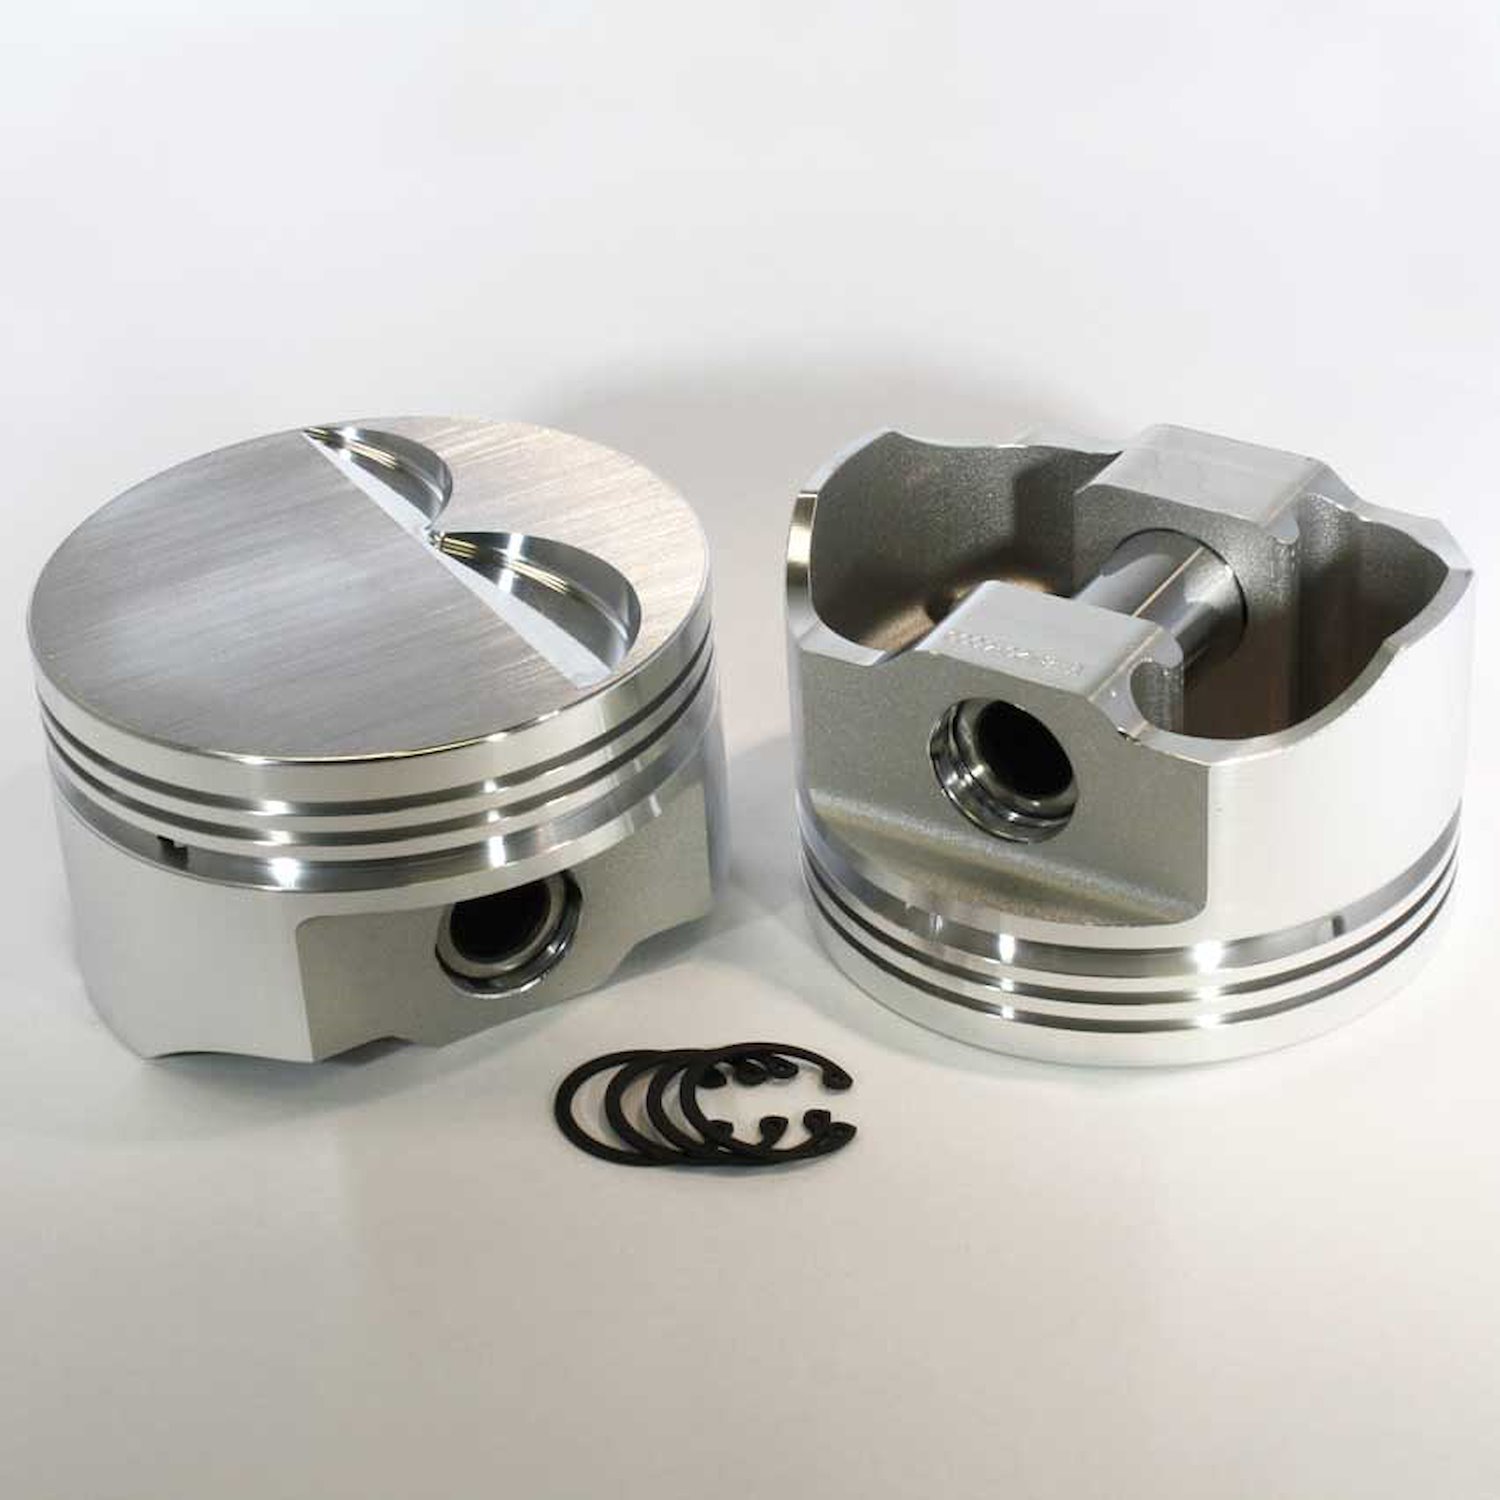 8785-4075 E-Series Flat Top Piston Set for 1999-2019 Chevy LS, 4.075 in. Bore, -3cc Volume [OEM Stroke]